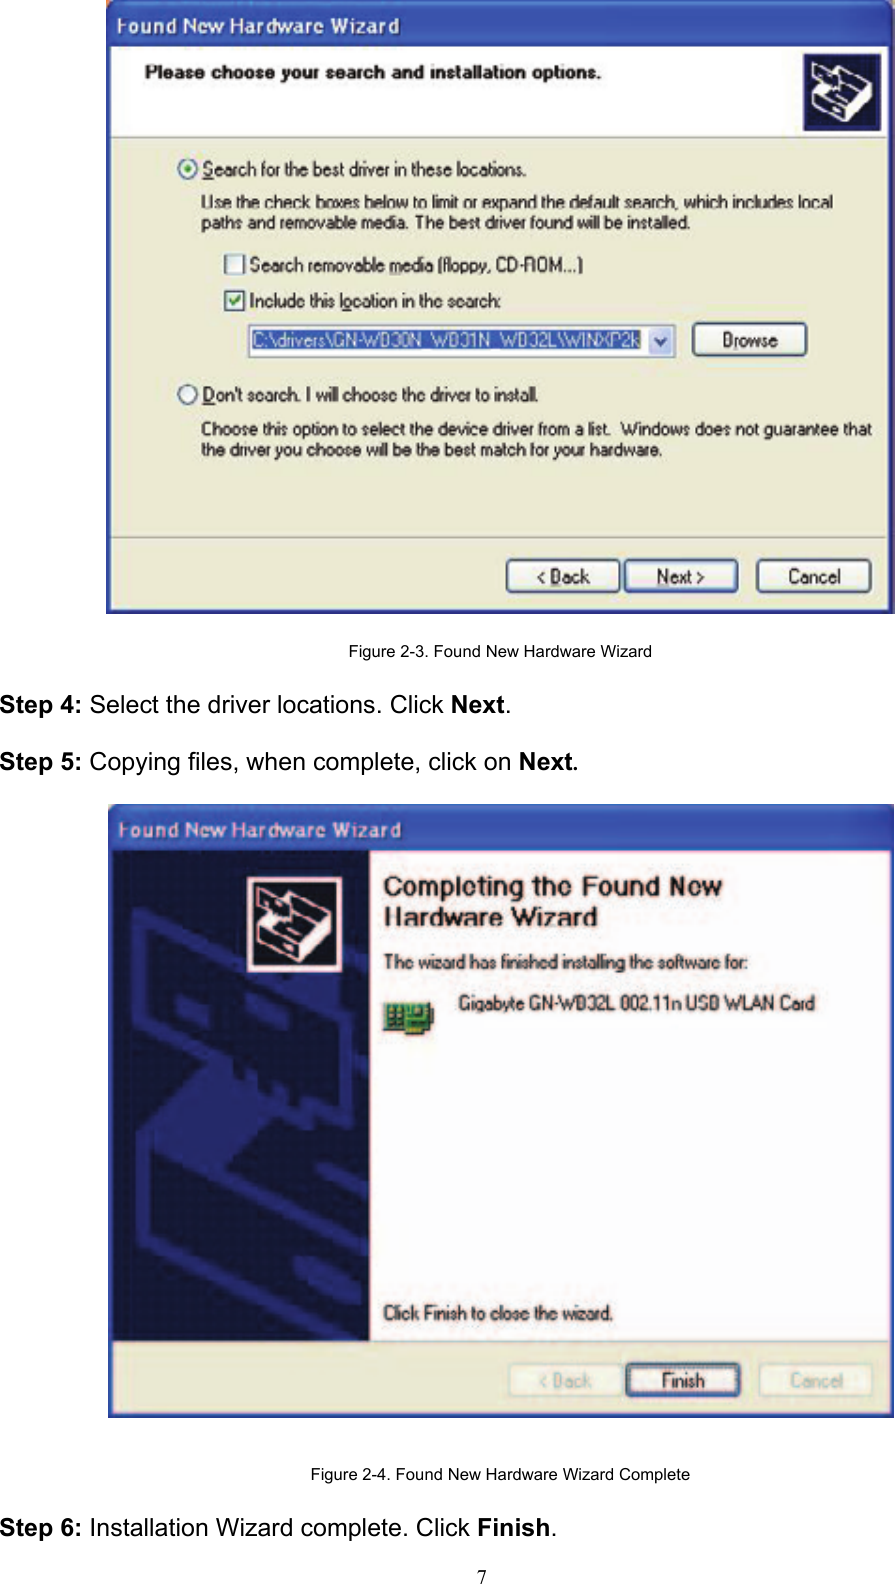 7     Figure 2-3. Found New Hardware Wizard  Step 4: Select the driver locations. Click Next.  Step 5: Copying files, when complete, click on Next.     Figure 2-4. Found New Hardware Wizard Complete  Step 6: Installation Wizard complete. Click Finish. 